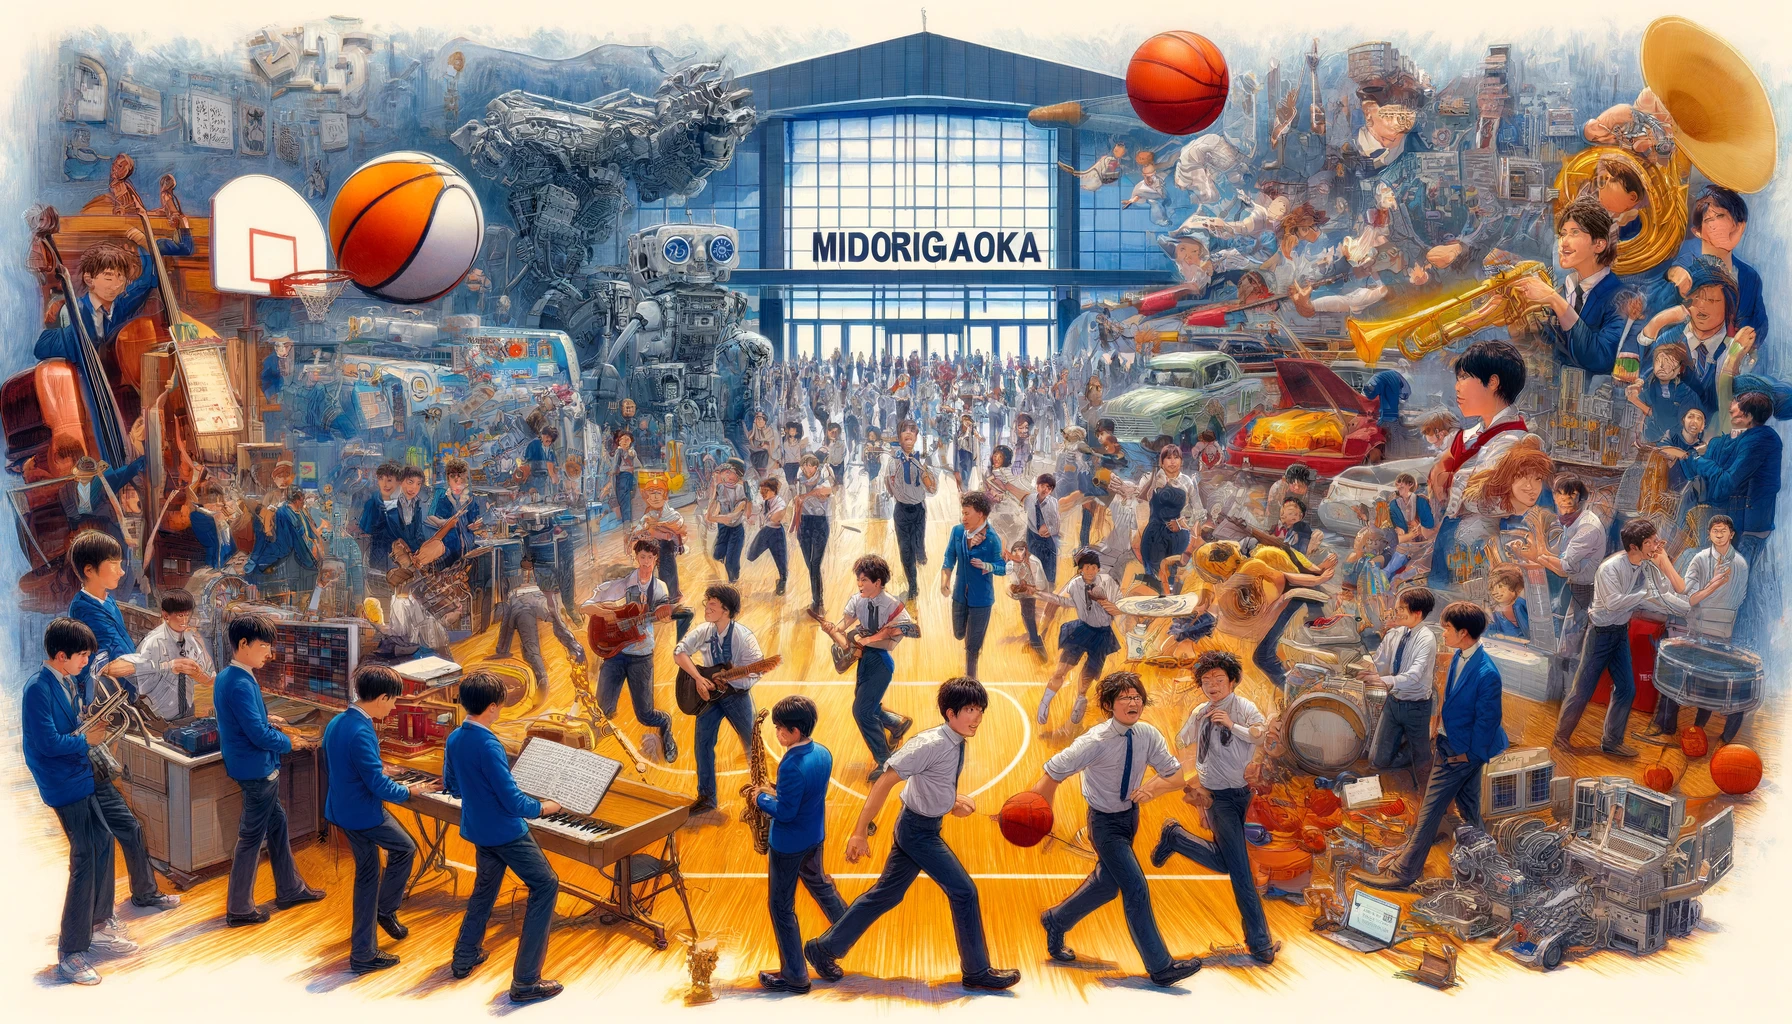 An energetic scene at Midorigaoka High School focusing on students engaged in various club activities. The image depicts students participating in a range of extracurricular activities such as a music band practice, a robotics club meeting, and sports teams in action, like basketball and soccer. The environment is lively and filled with enthusiasm, showcasing the students' passion and teamwork. The school's spirit is highlighted by the word 'MIDORIGAOKA' displayed in bold English letters in a prominent part of the scene, reflecting the school's vibrant community spirit.